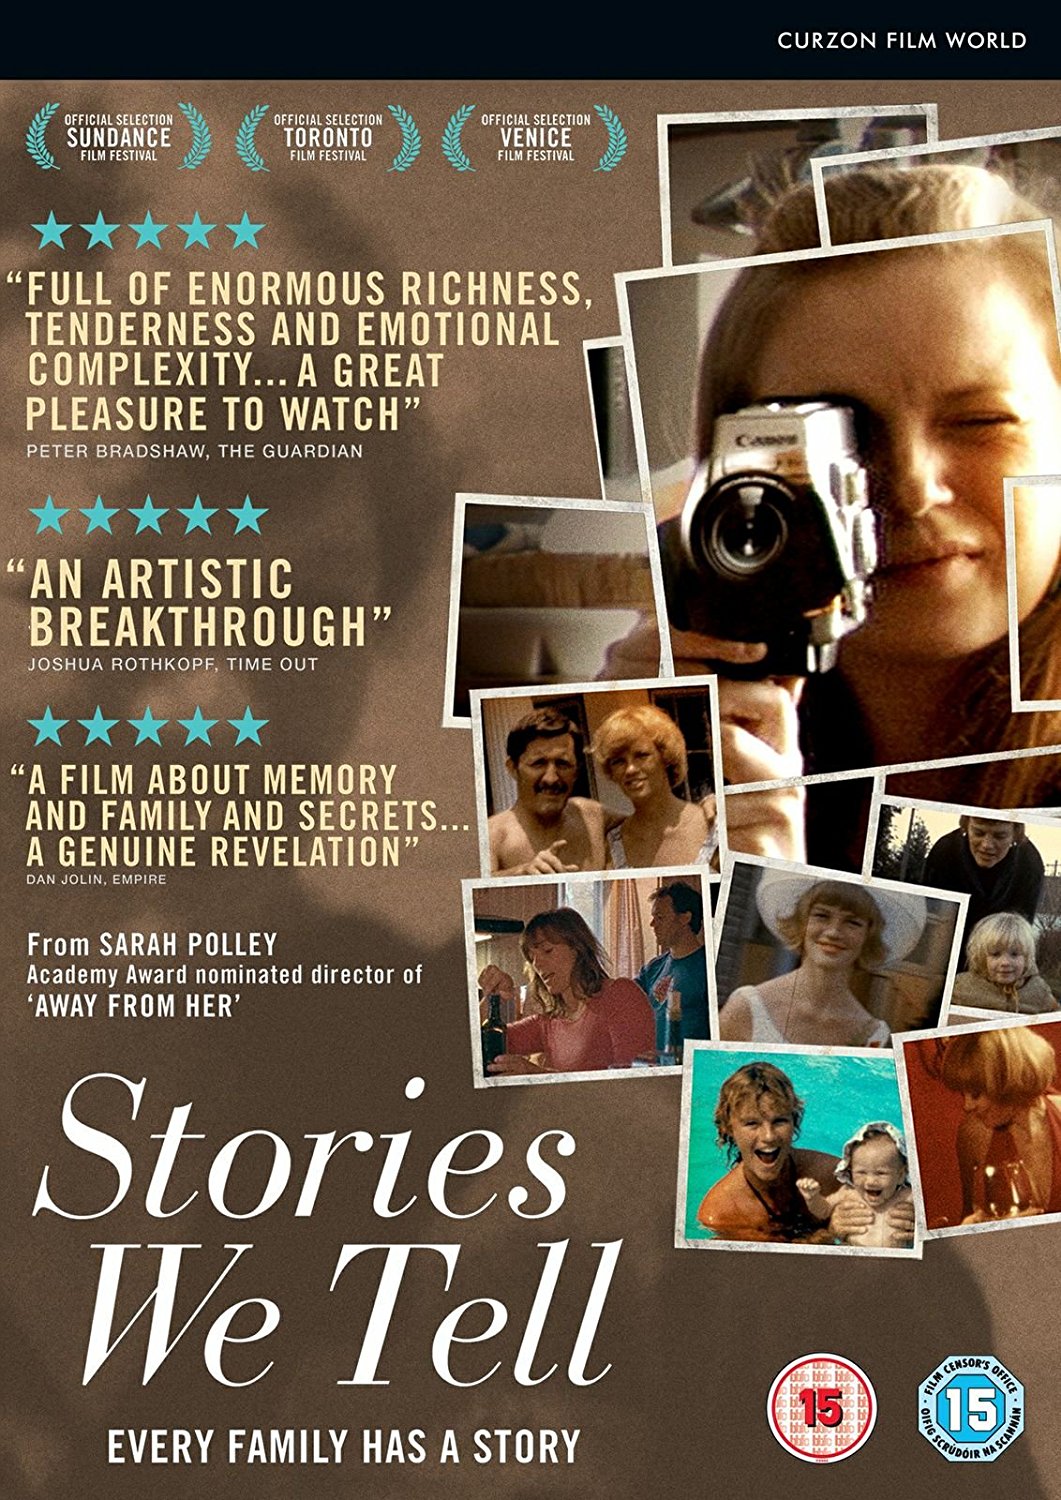 Stories We Tell | Sarah Polley